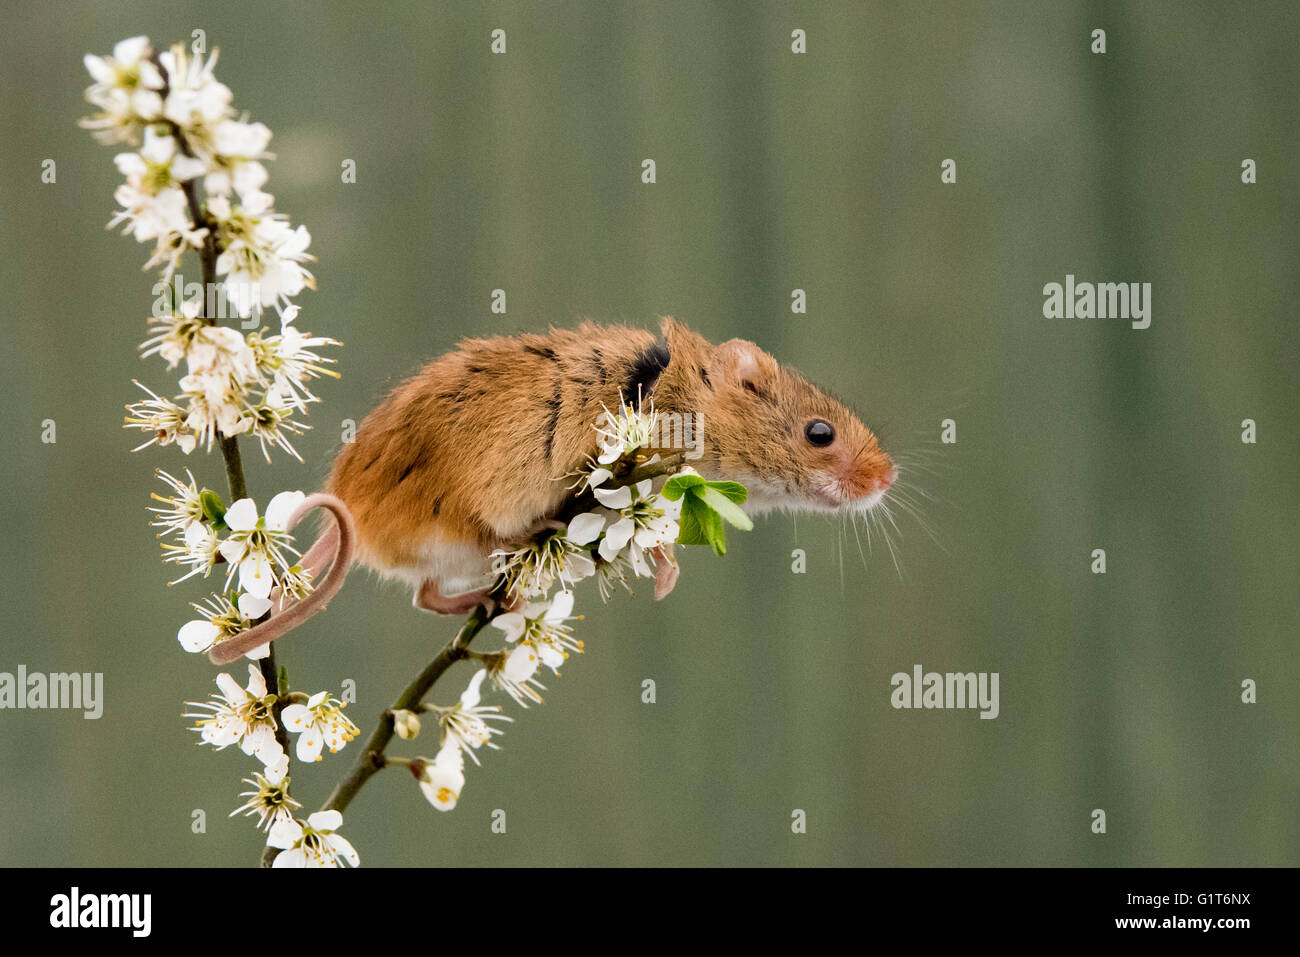 Harvest mouse (Micromys minutus) climbing and being curious Stock Photo